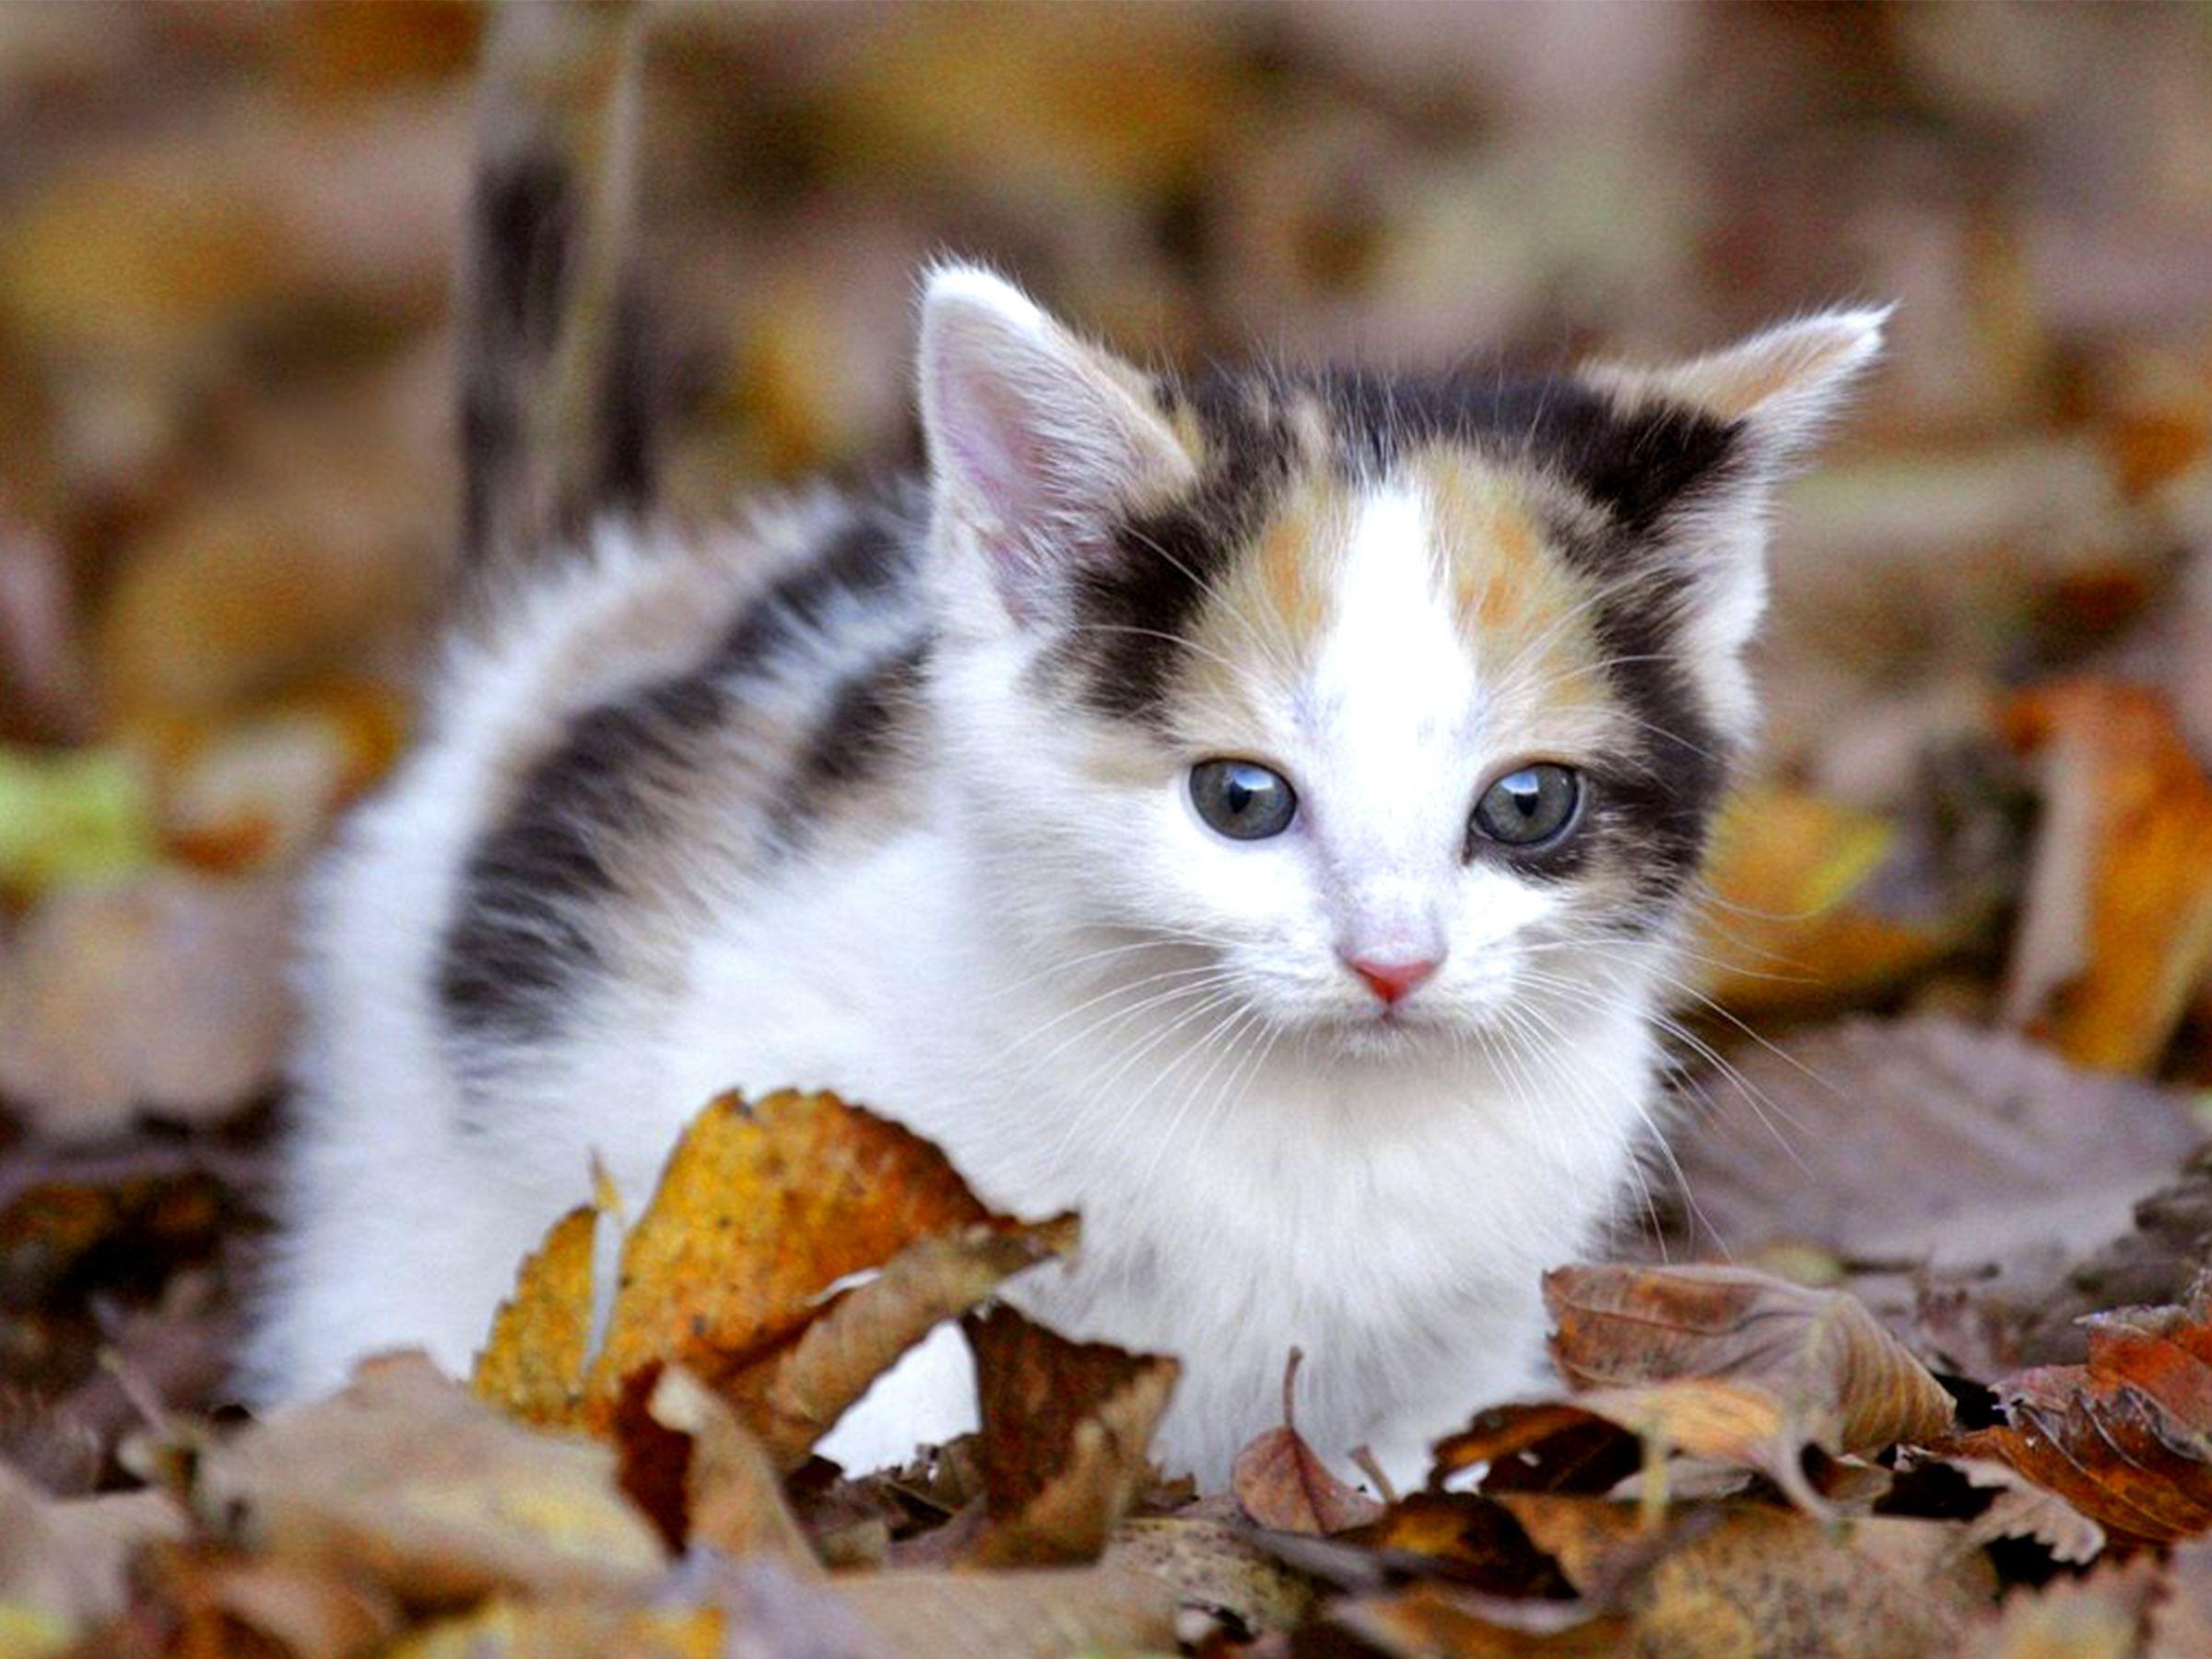 Cute Cat HD Image Pics Photo Kitten Wallpaper High For Mobile